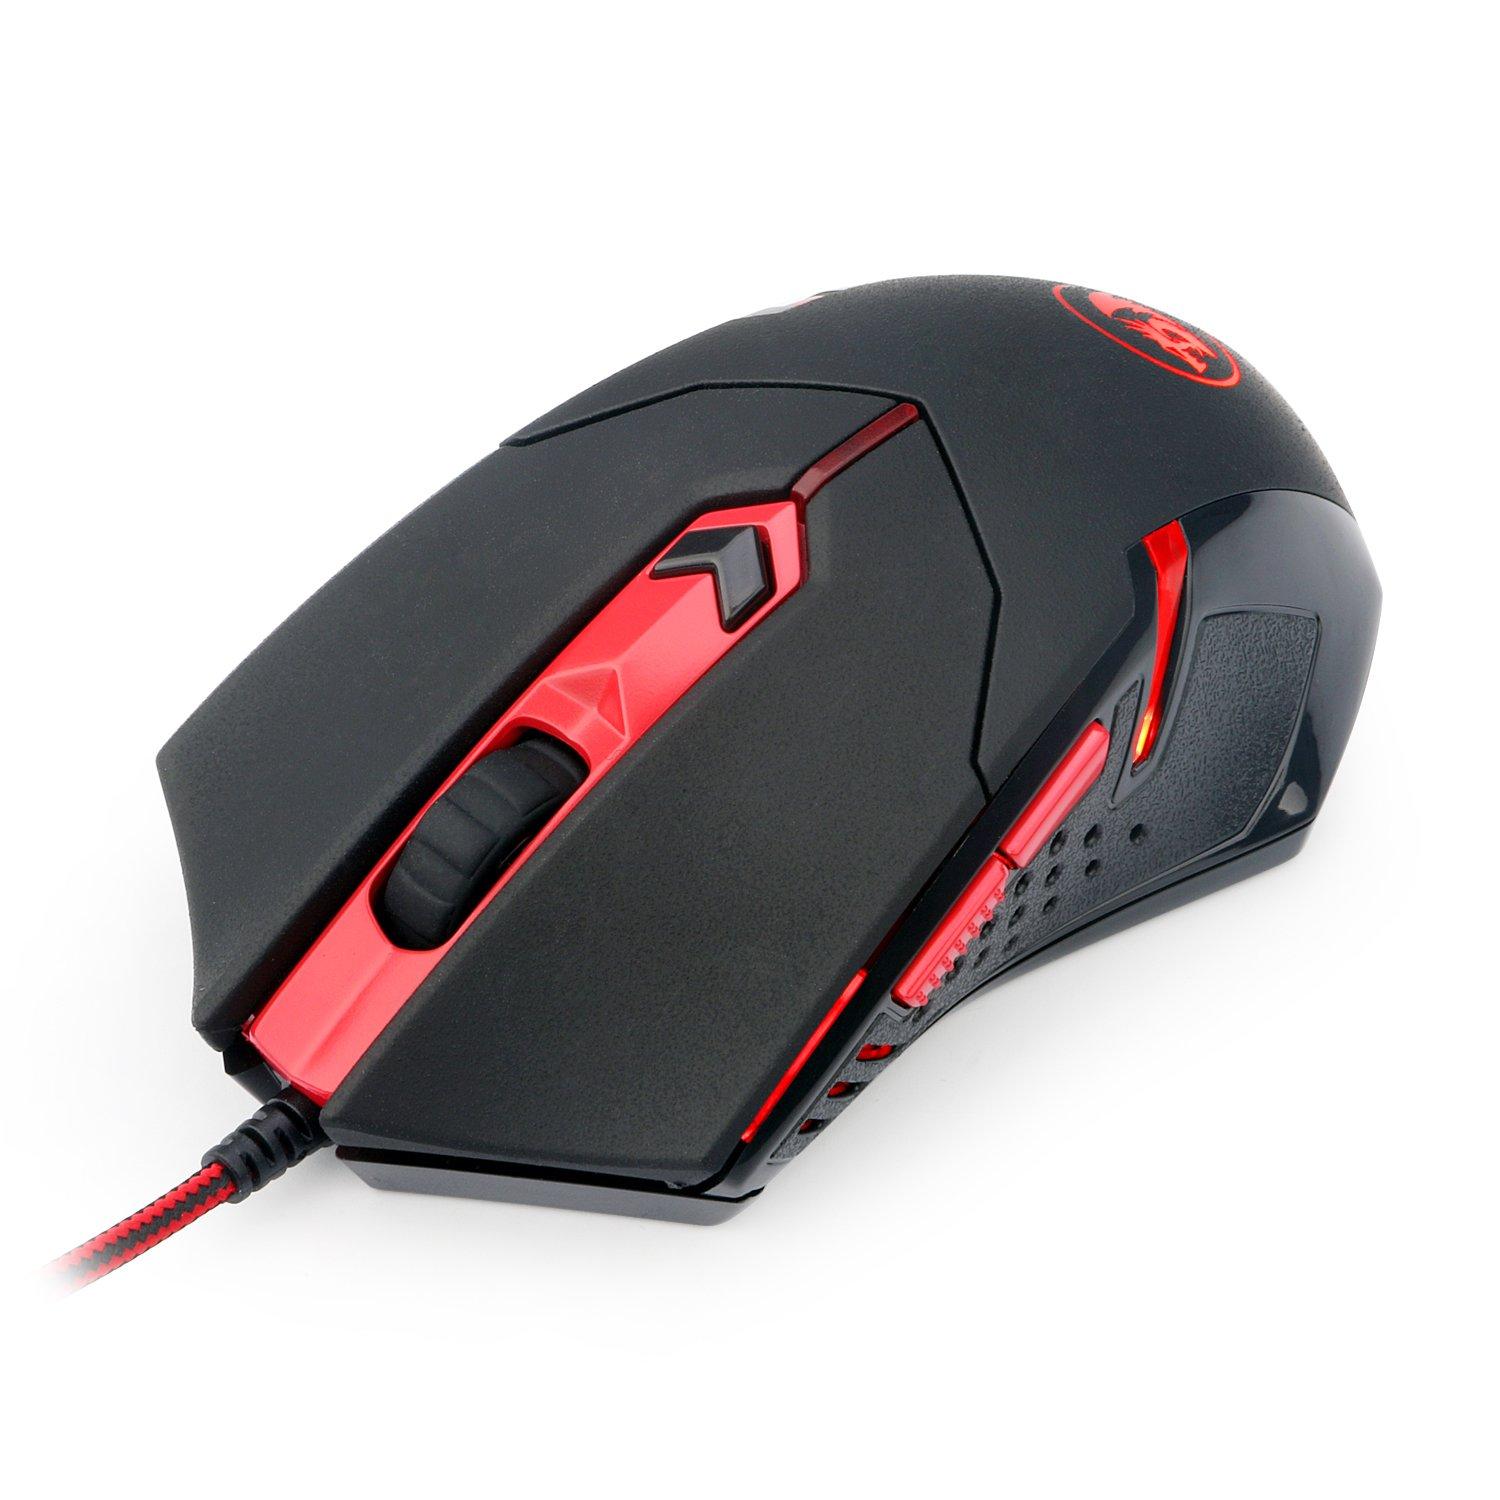 list item 2 of 6 Redragon S101 Wired RGB Gaming Keyboard and Mouse Combo